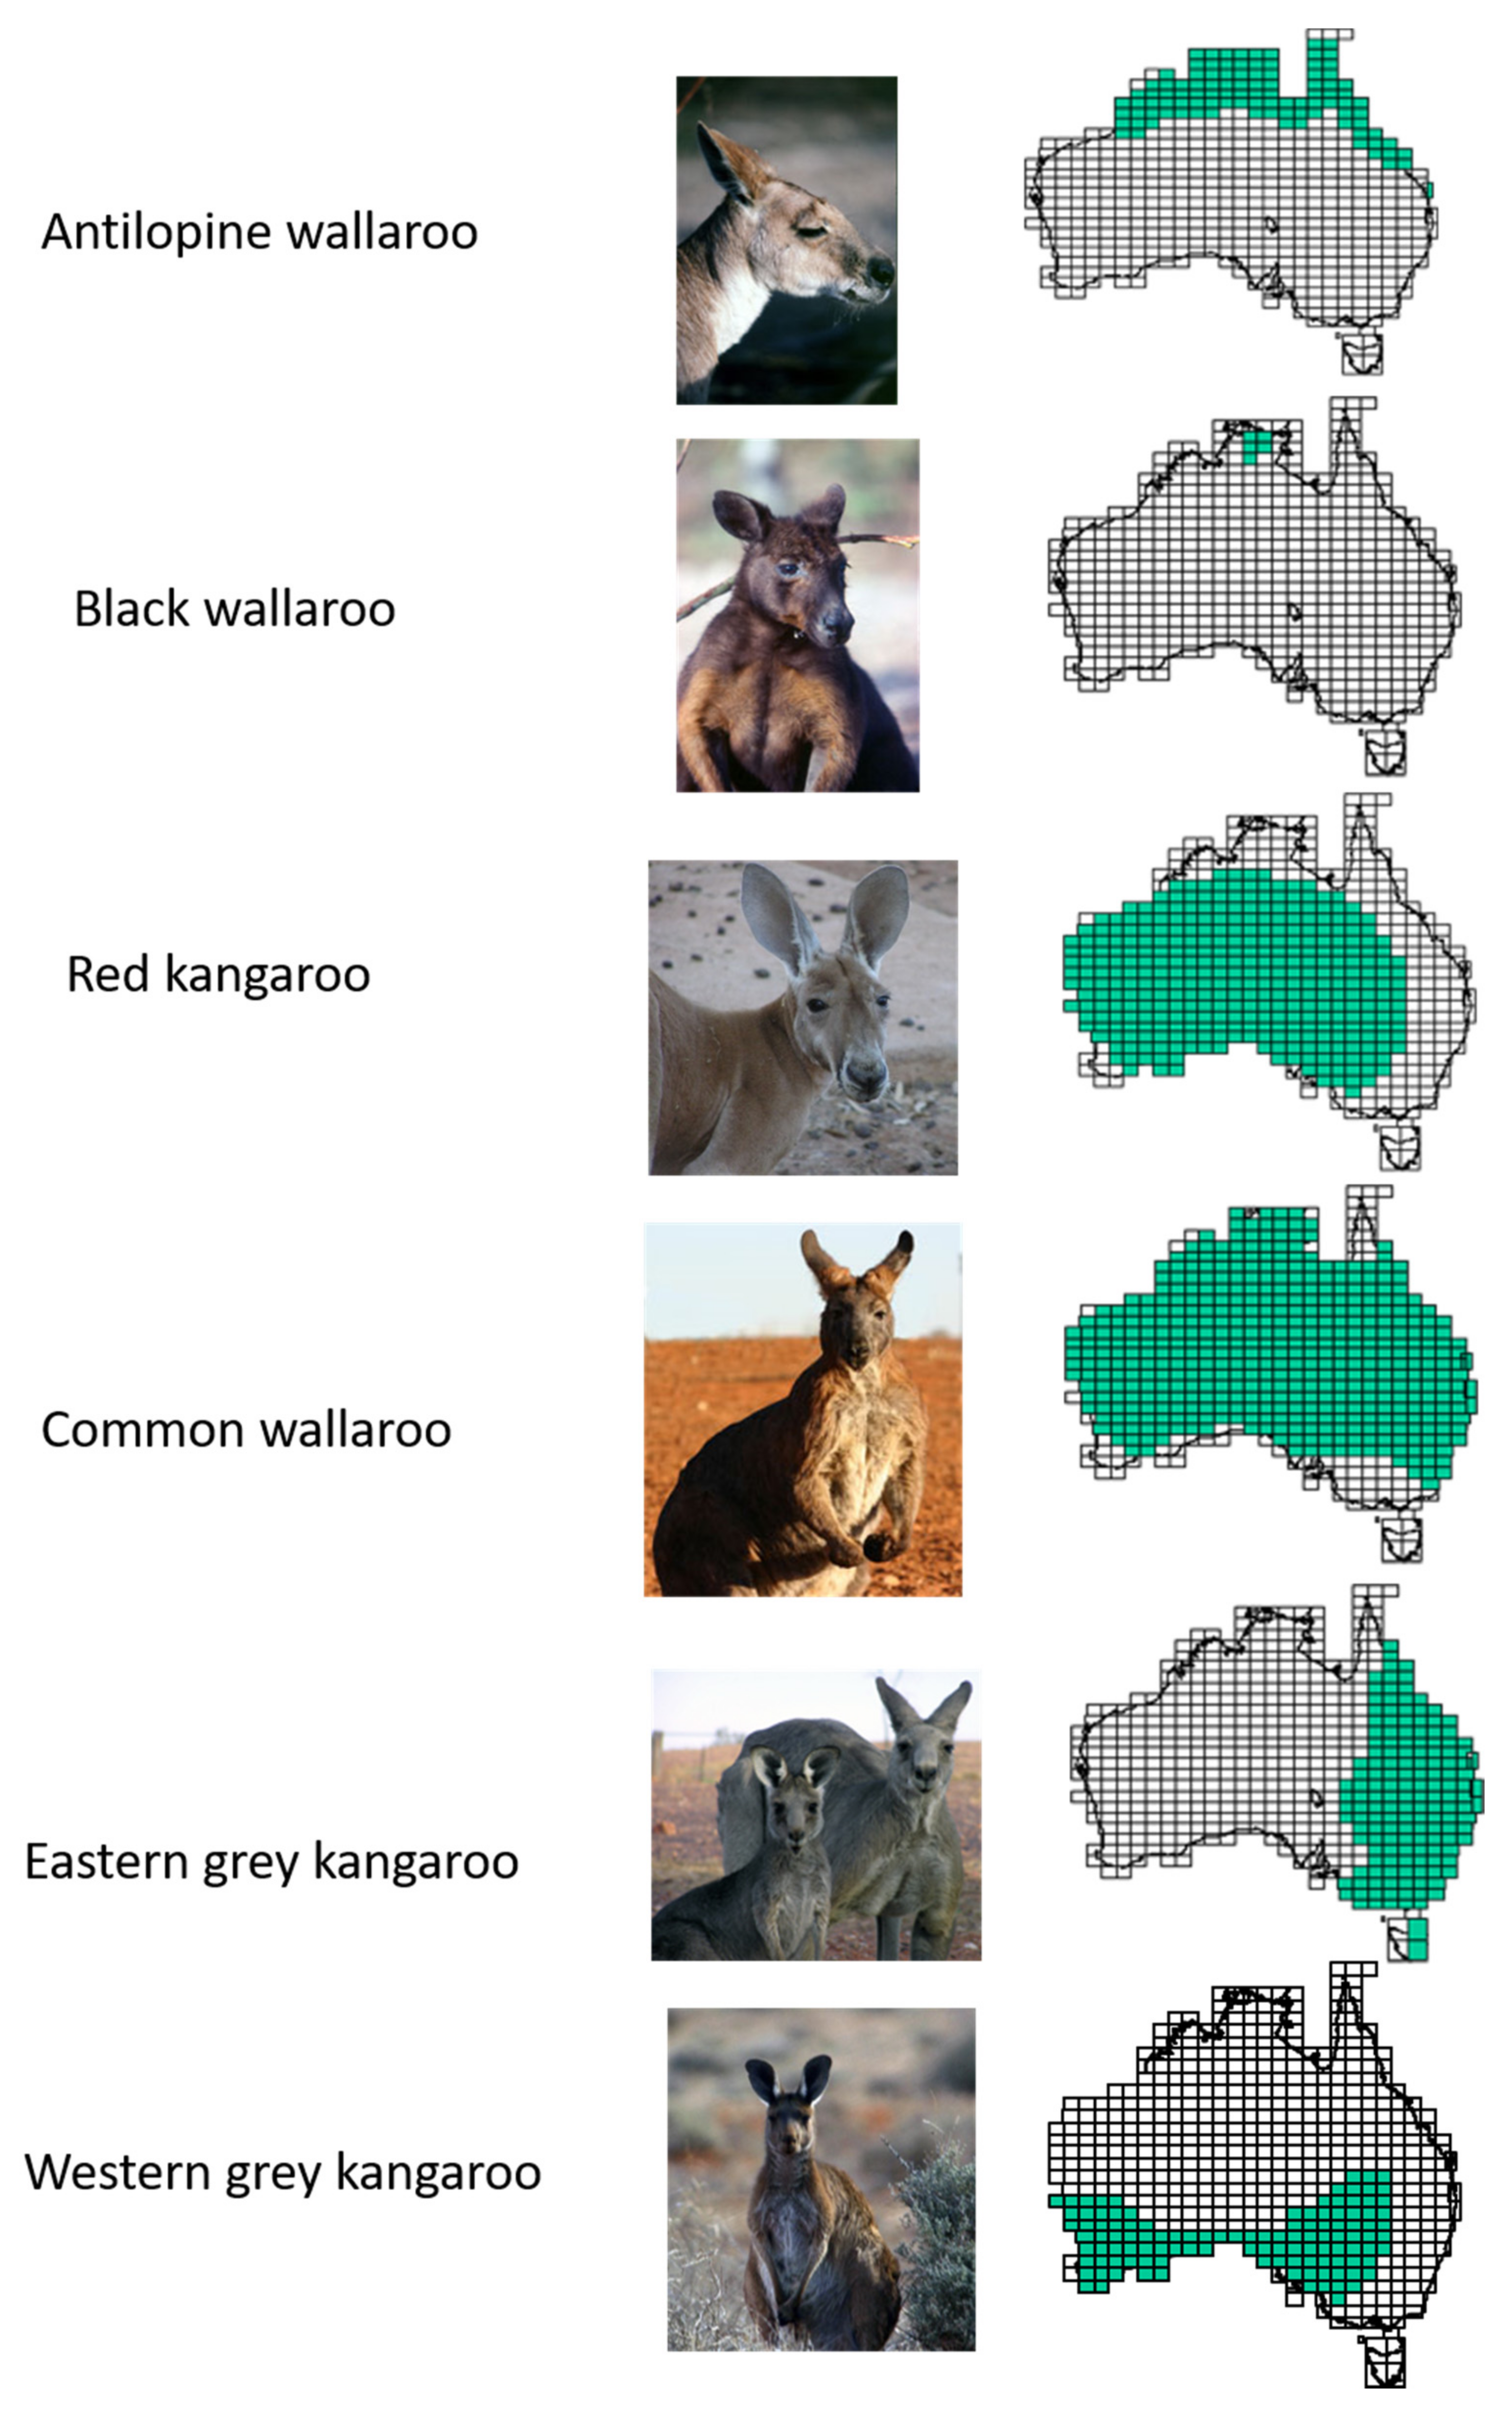 Animals Free Full-Text The Perils of Being Populous Control and Conservation of Abundant Kangaroo Species